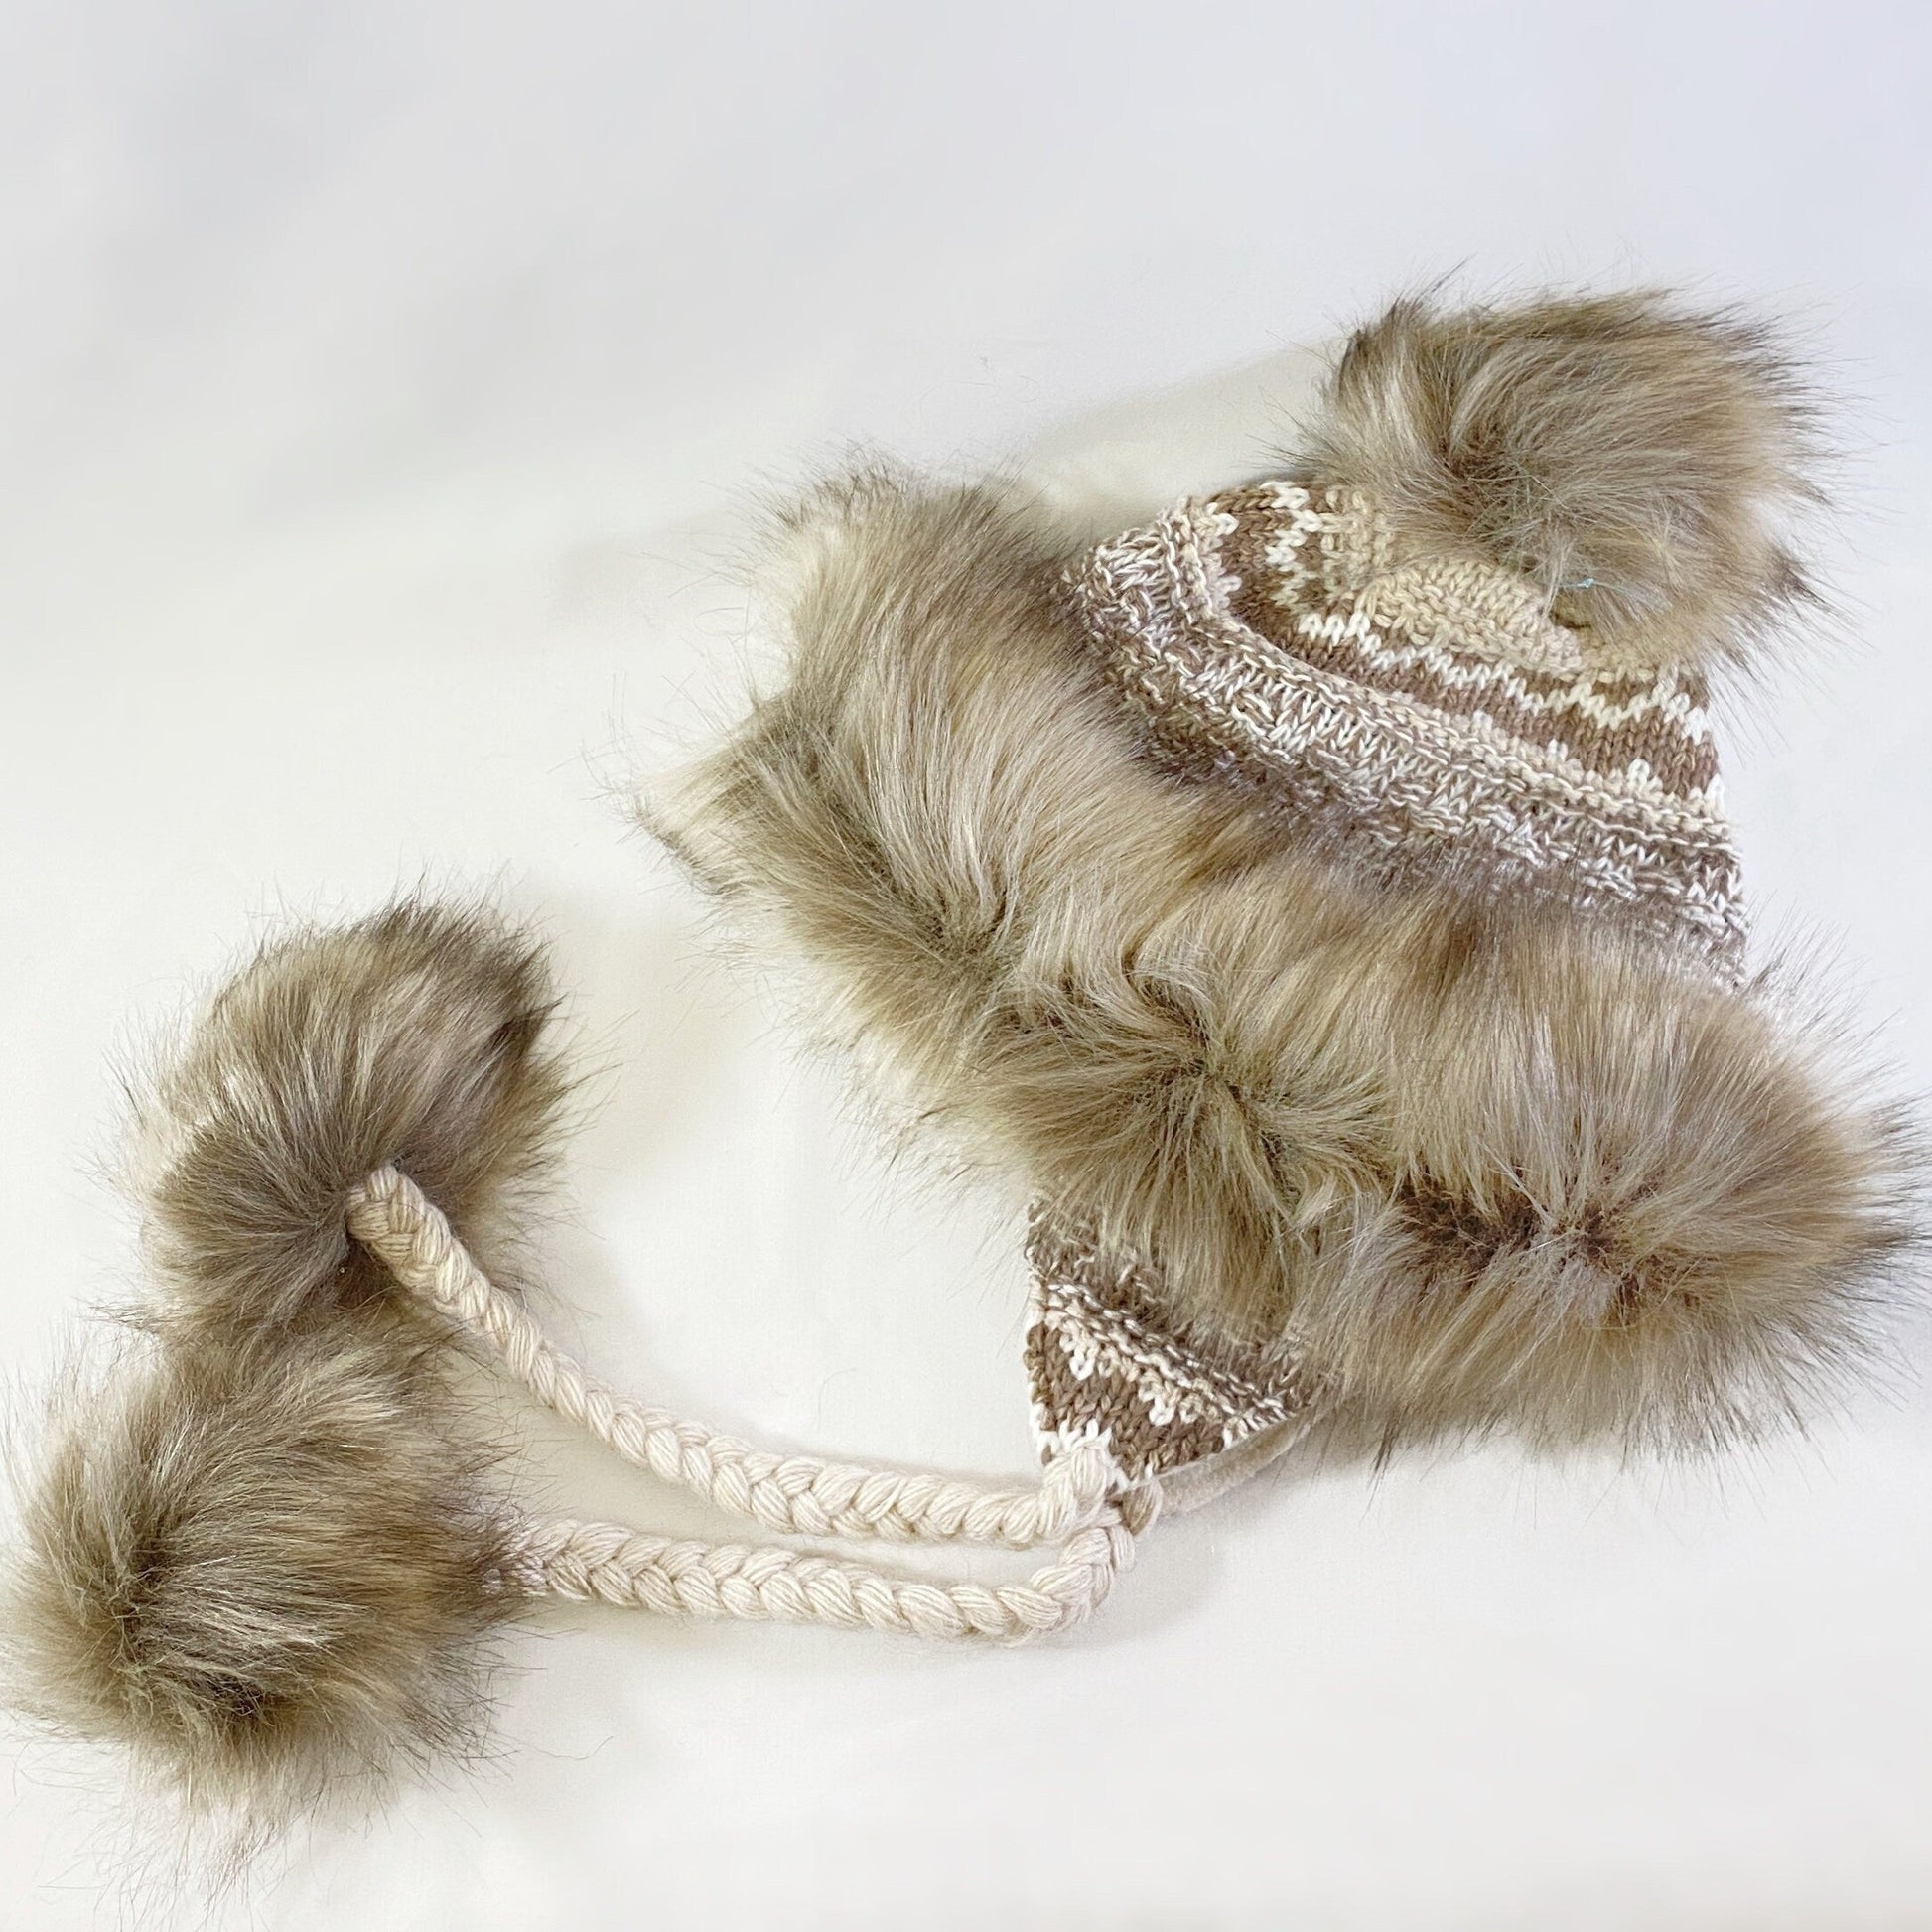 Brown/Taupe and White Winter Hat With Flaps and Pom Poms - Made From Italian Wool, Acrylic Yarn, and Faux Fur